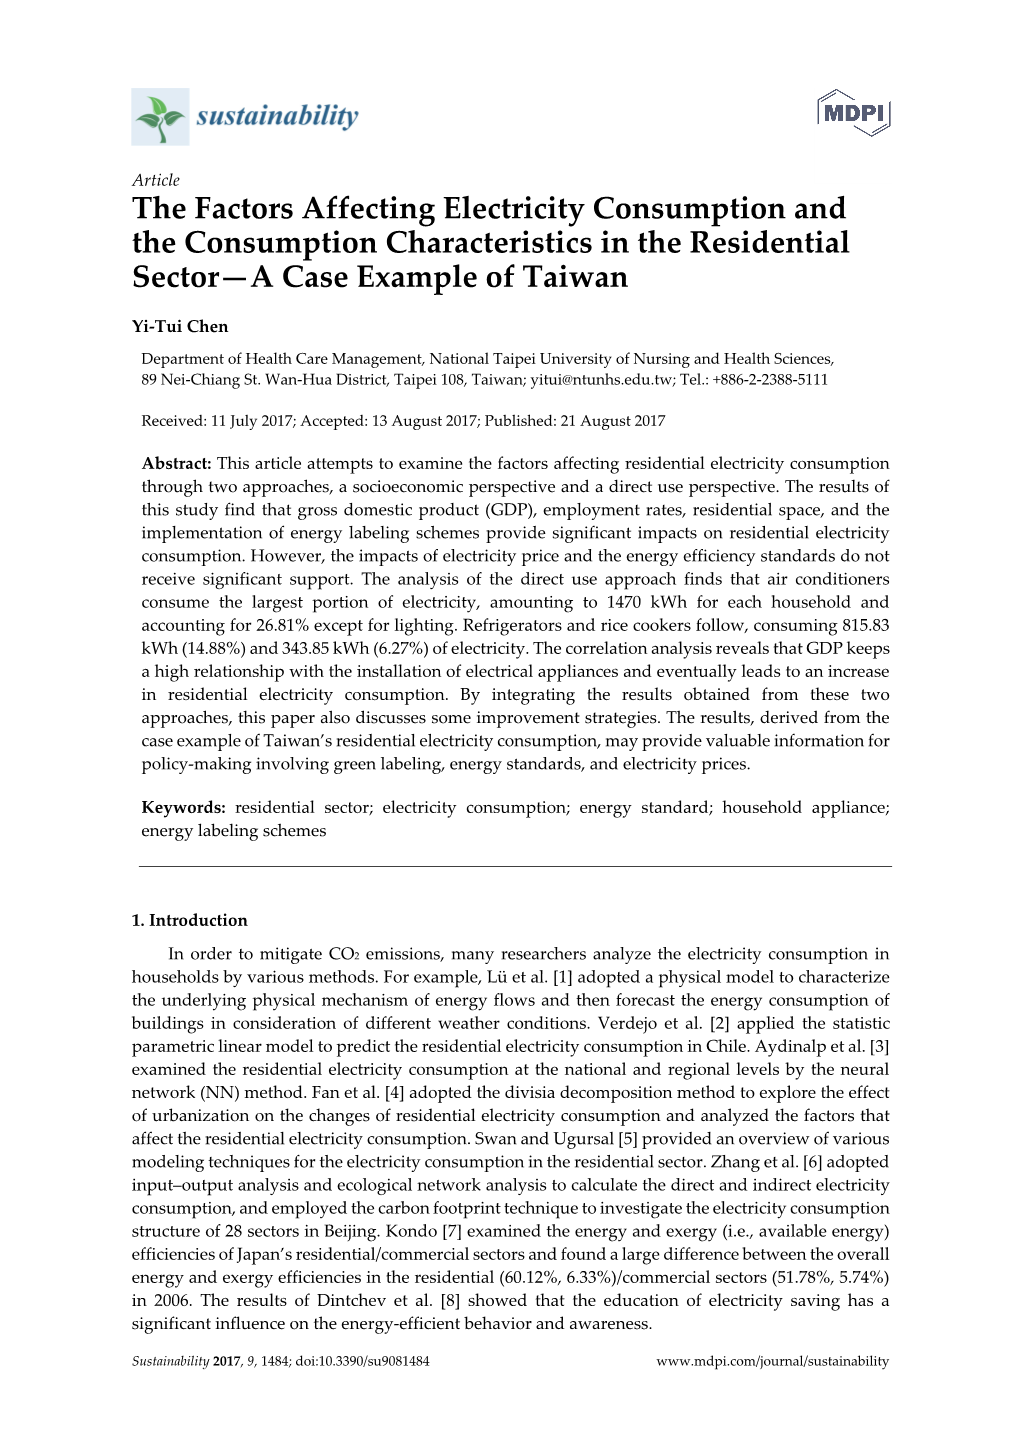 The Factors Affecting Electricity Consumption and the Consumption Characteristics in the Residential Sector—A Case Example of Taiwan